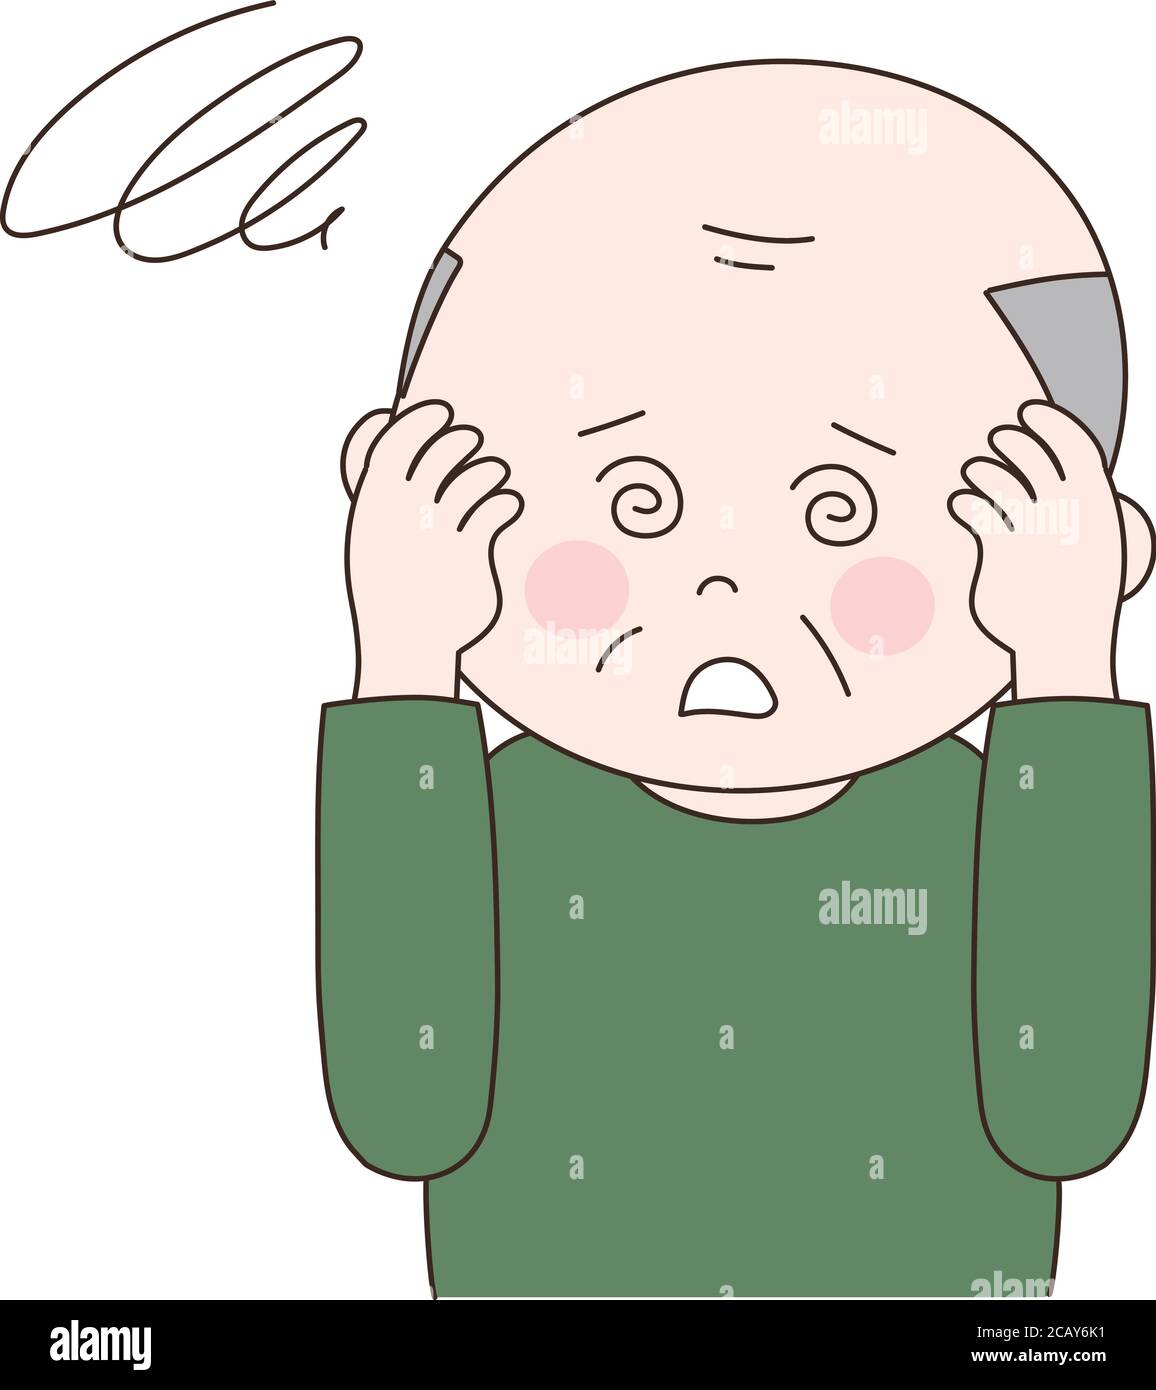 Sick dizzy man suffering headache. Vector illustration isolated on white background. Stock Vector